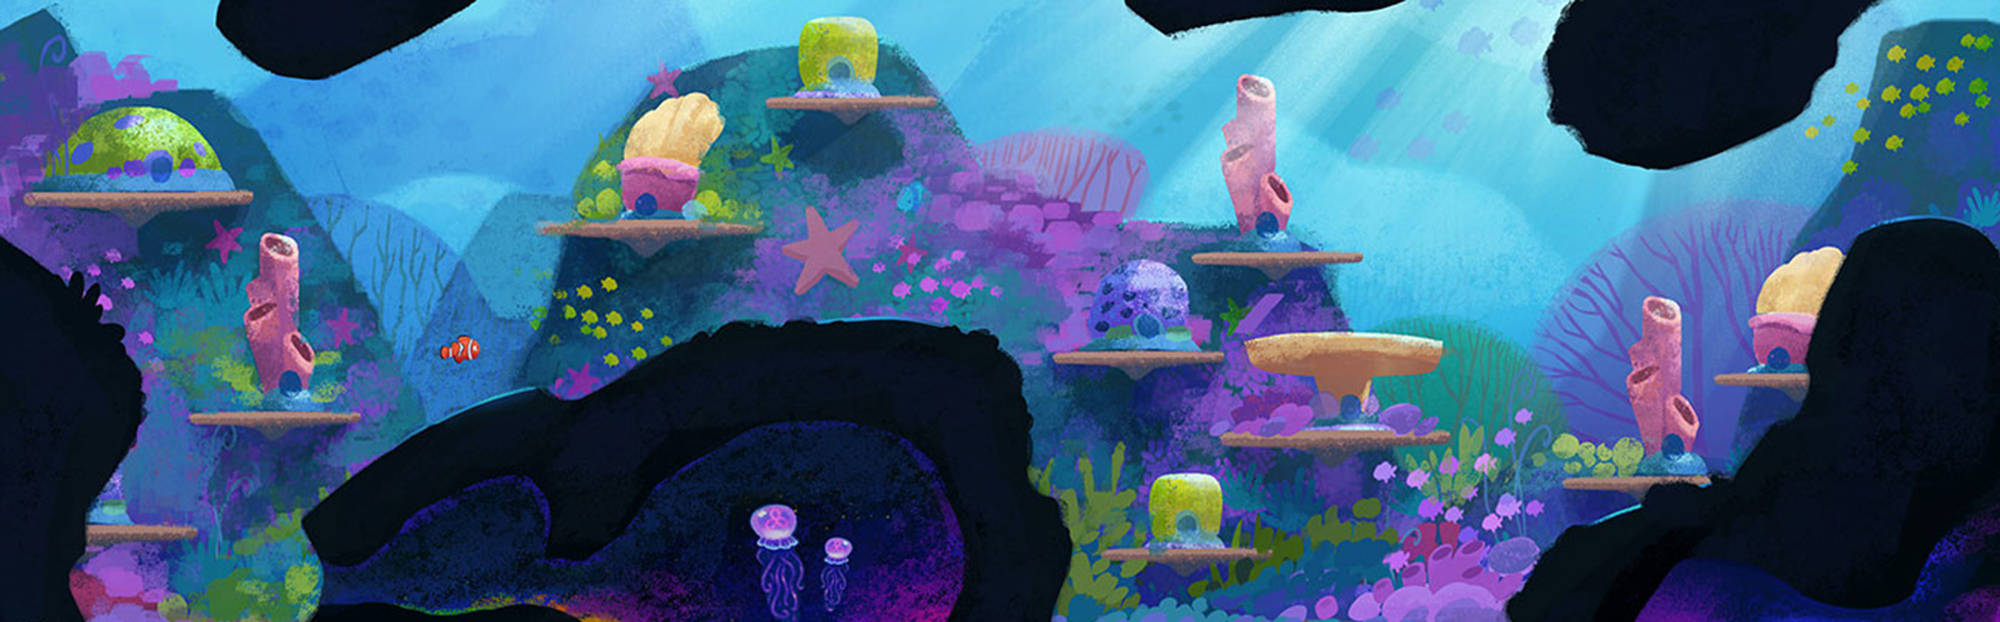 Finding Dory 2d Coral Concept Art Background